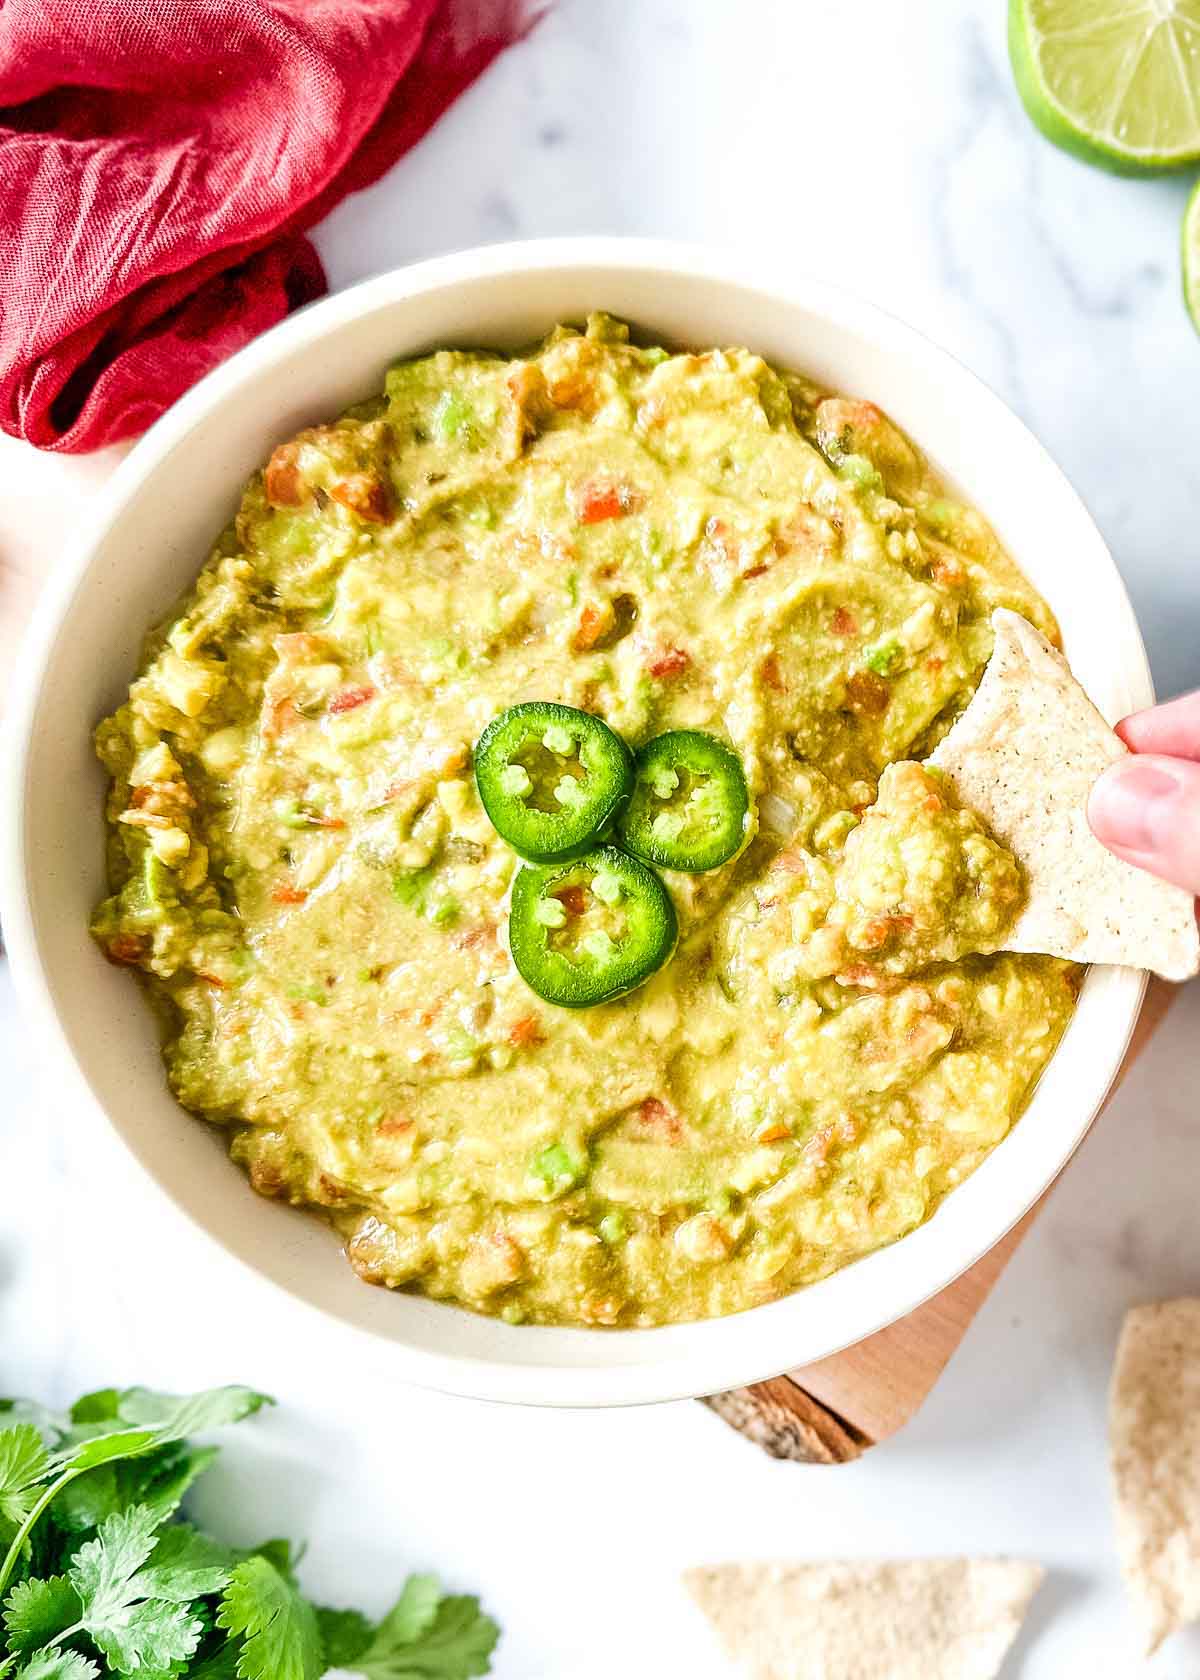 Guacamole dip in a white bowl with a hand holding a tortilla chip.